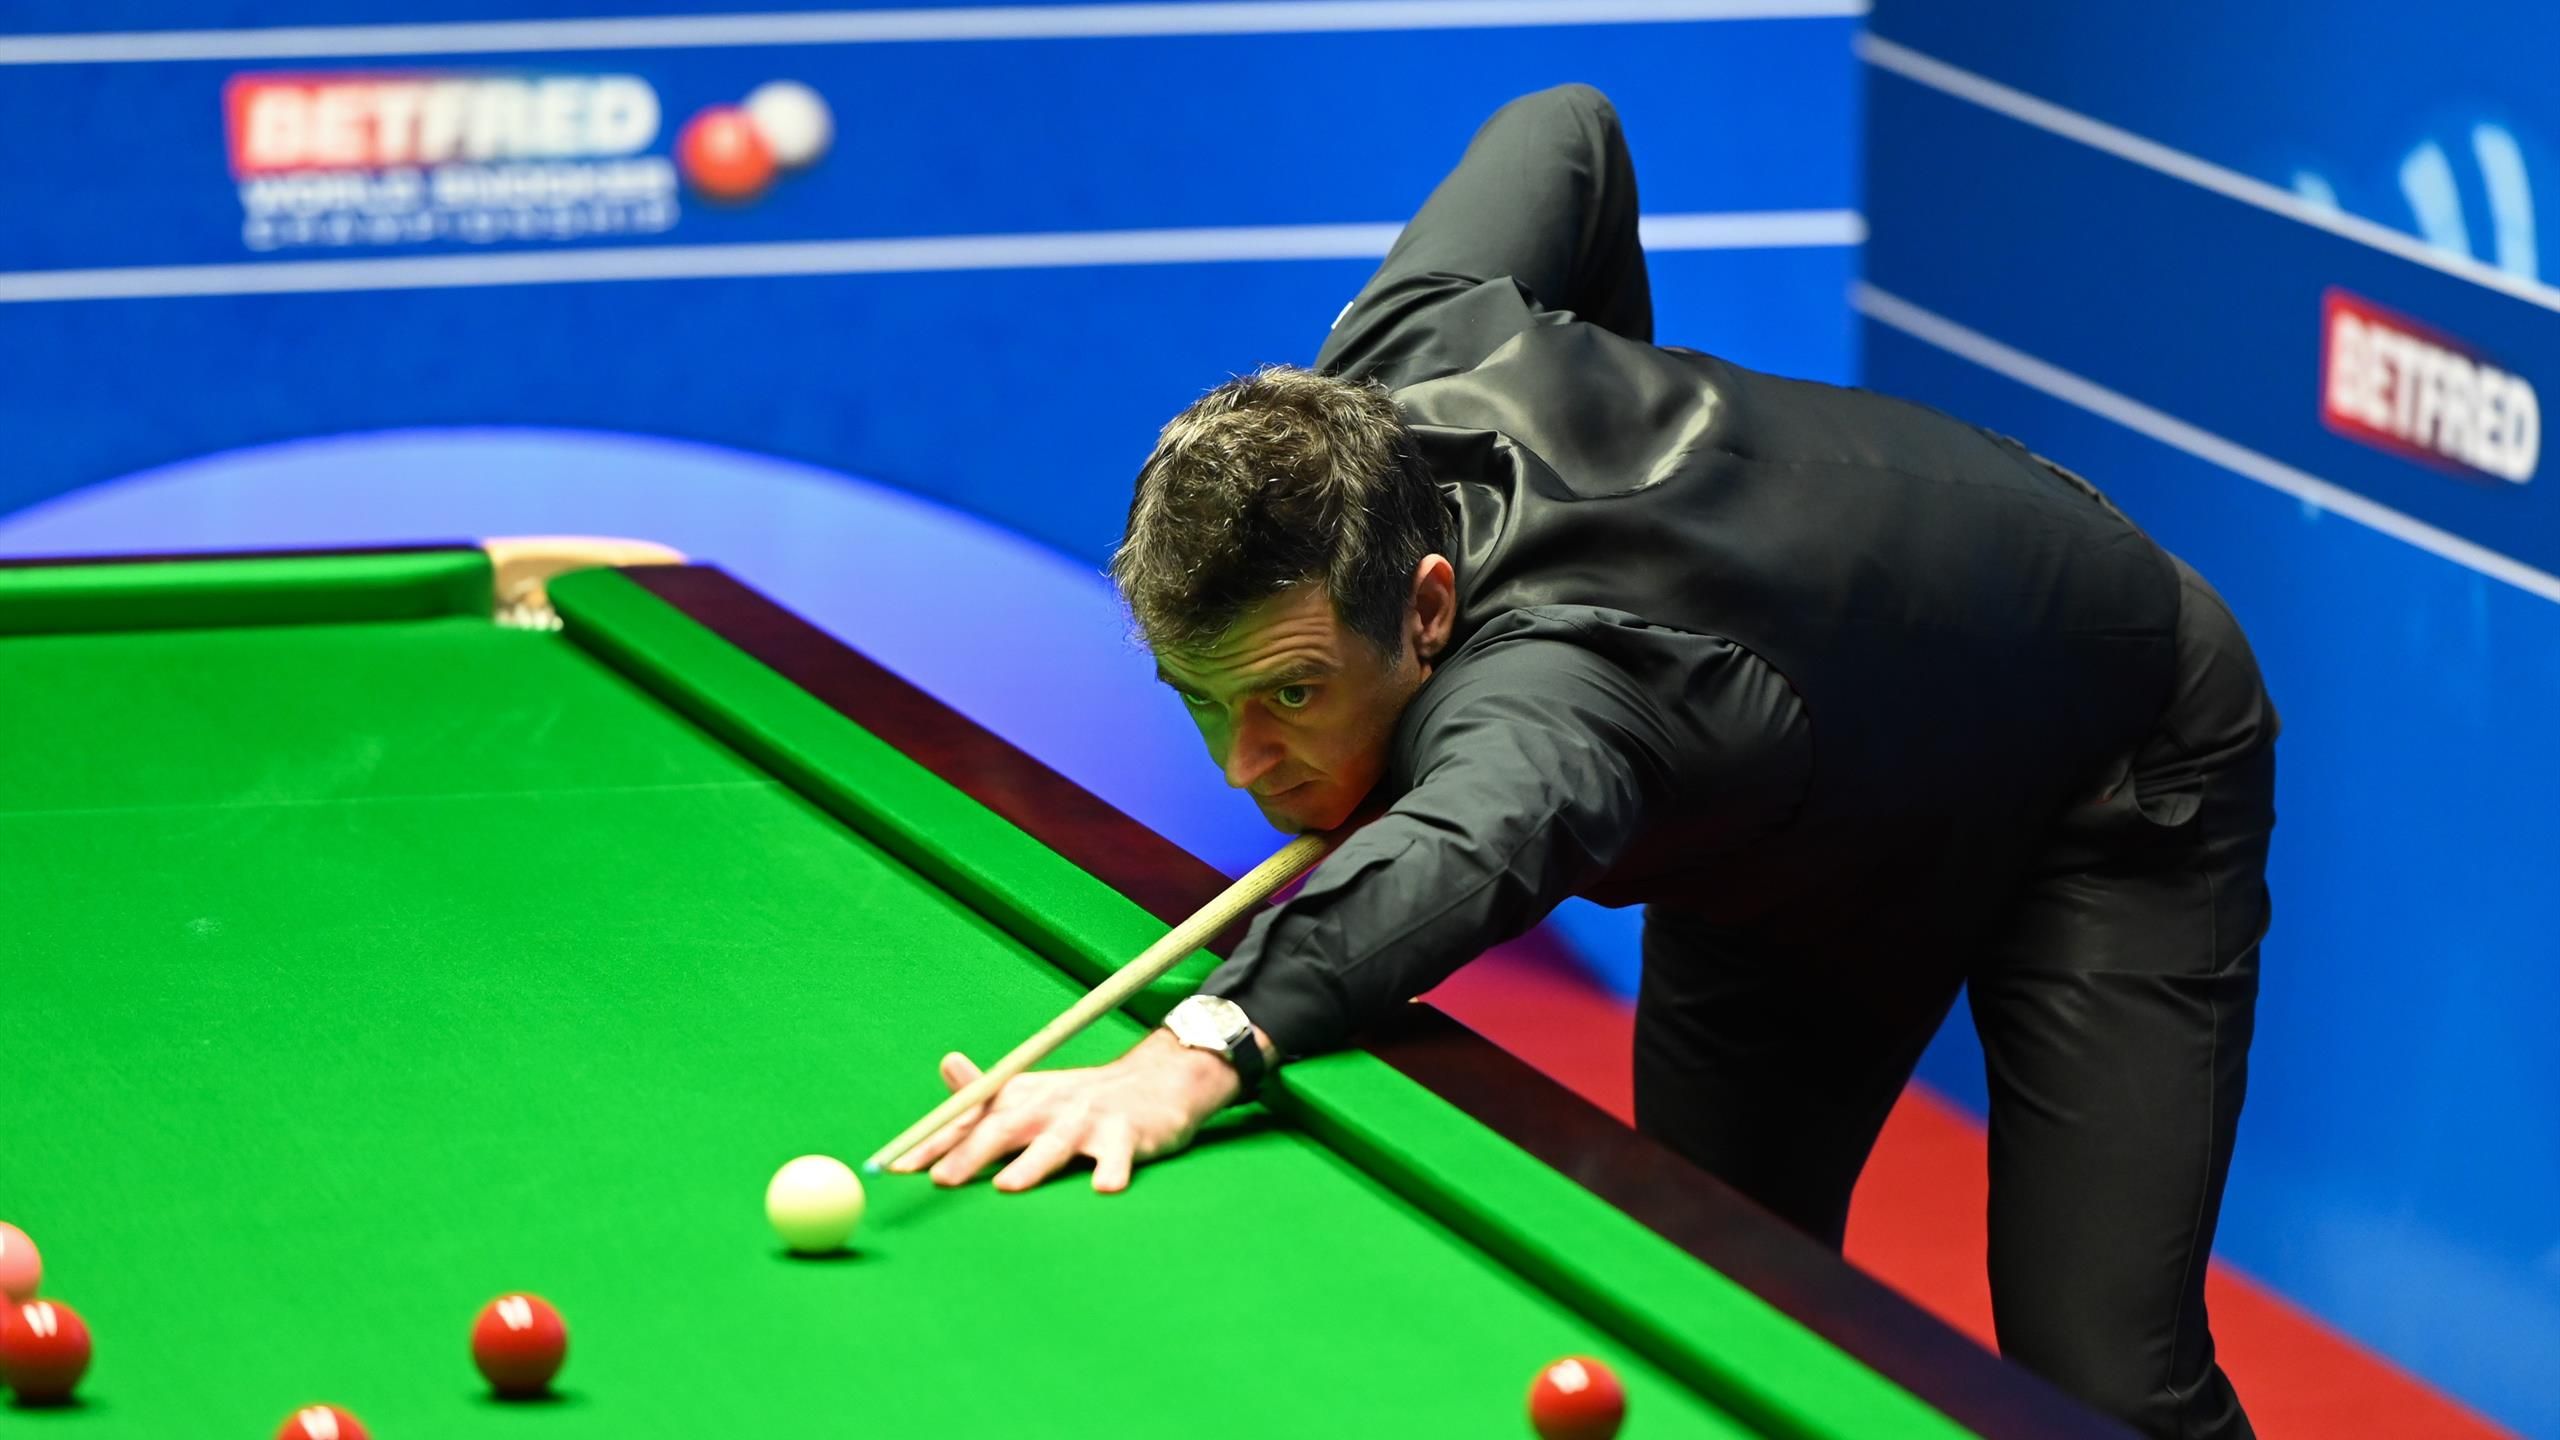 World Snooker Championship 2022 Schedule, results, order of play, live scores from the Crucible